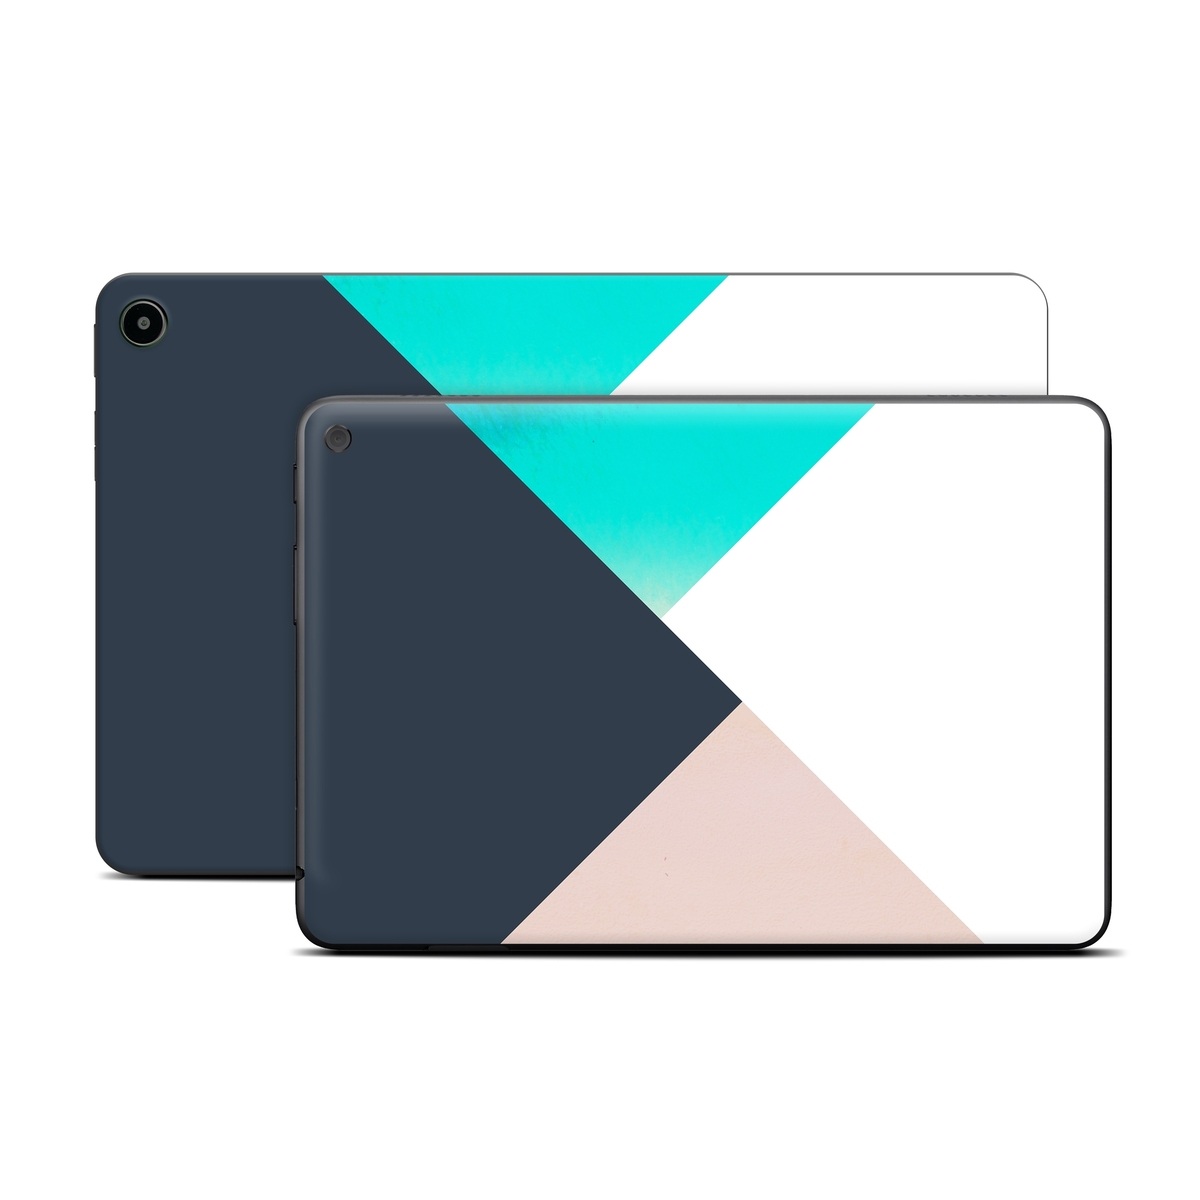 Amazon Fire Tablet Series Skin Skin design of Blue, Turquoise, Aqua, Line, Triangle, Design, Material property, Graphic design, Pattern, Architecture, with black, white, brown, blue colors